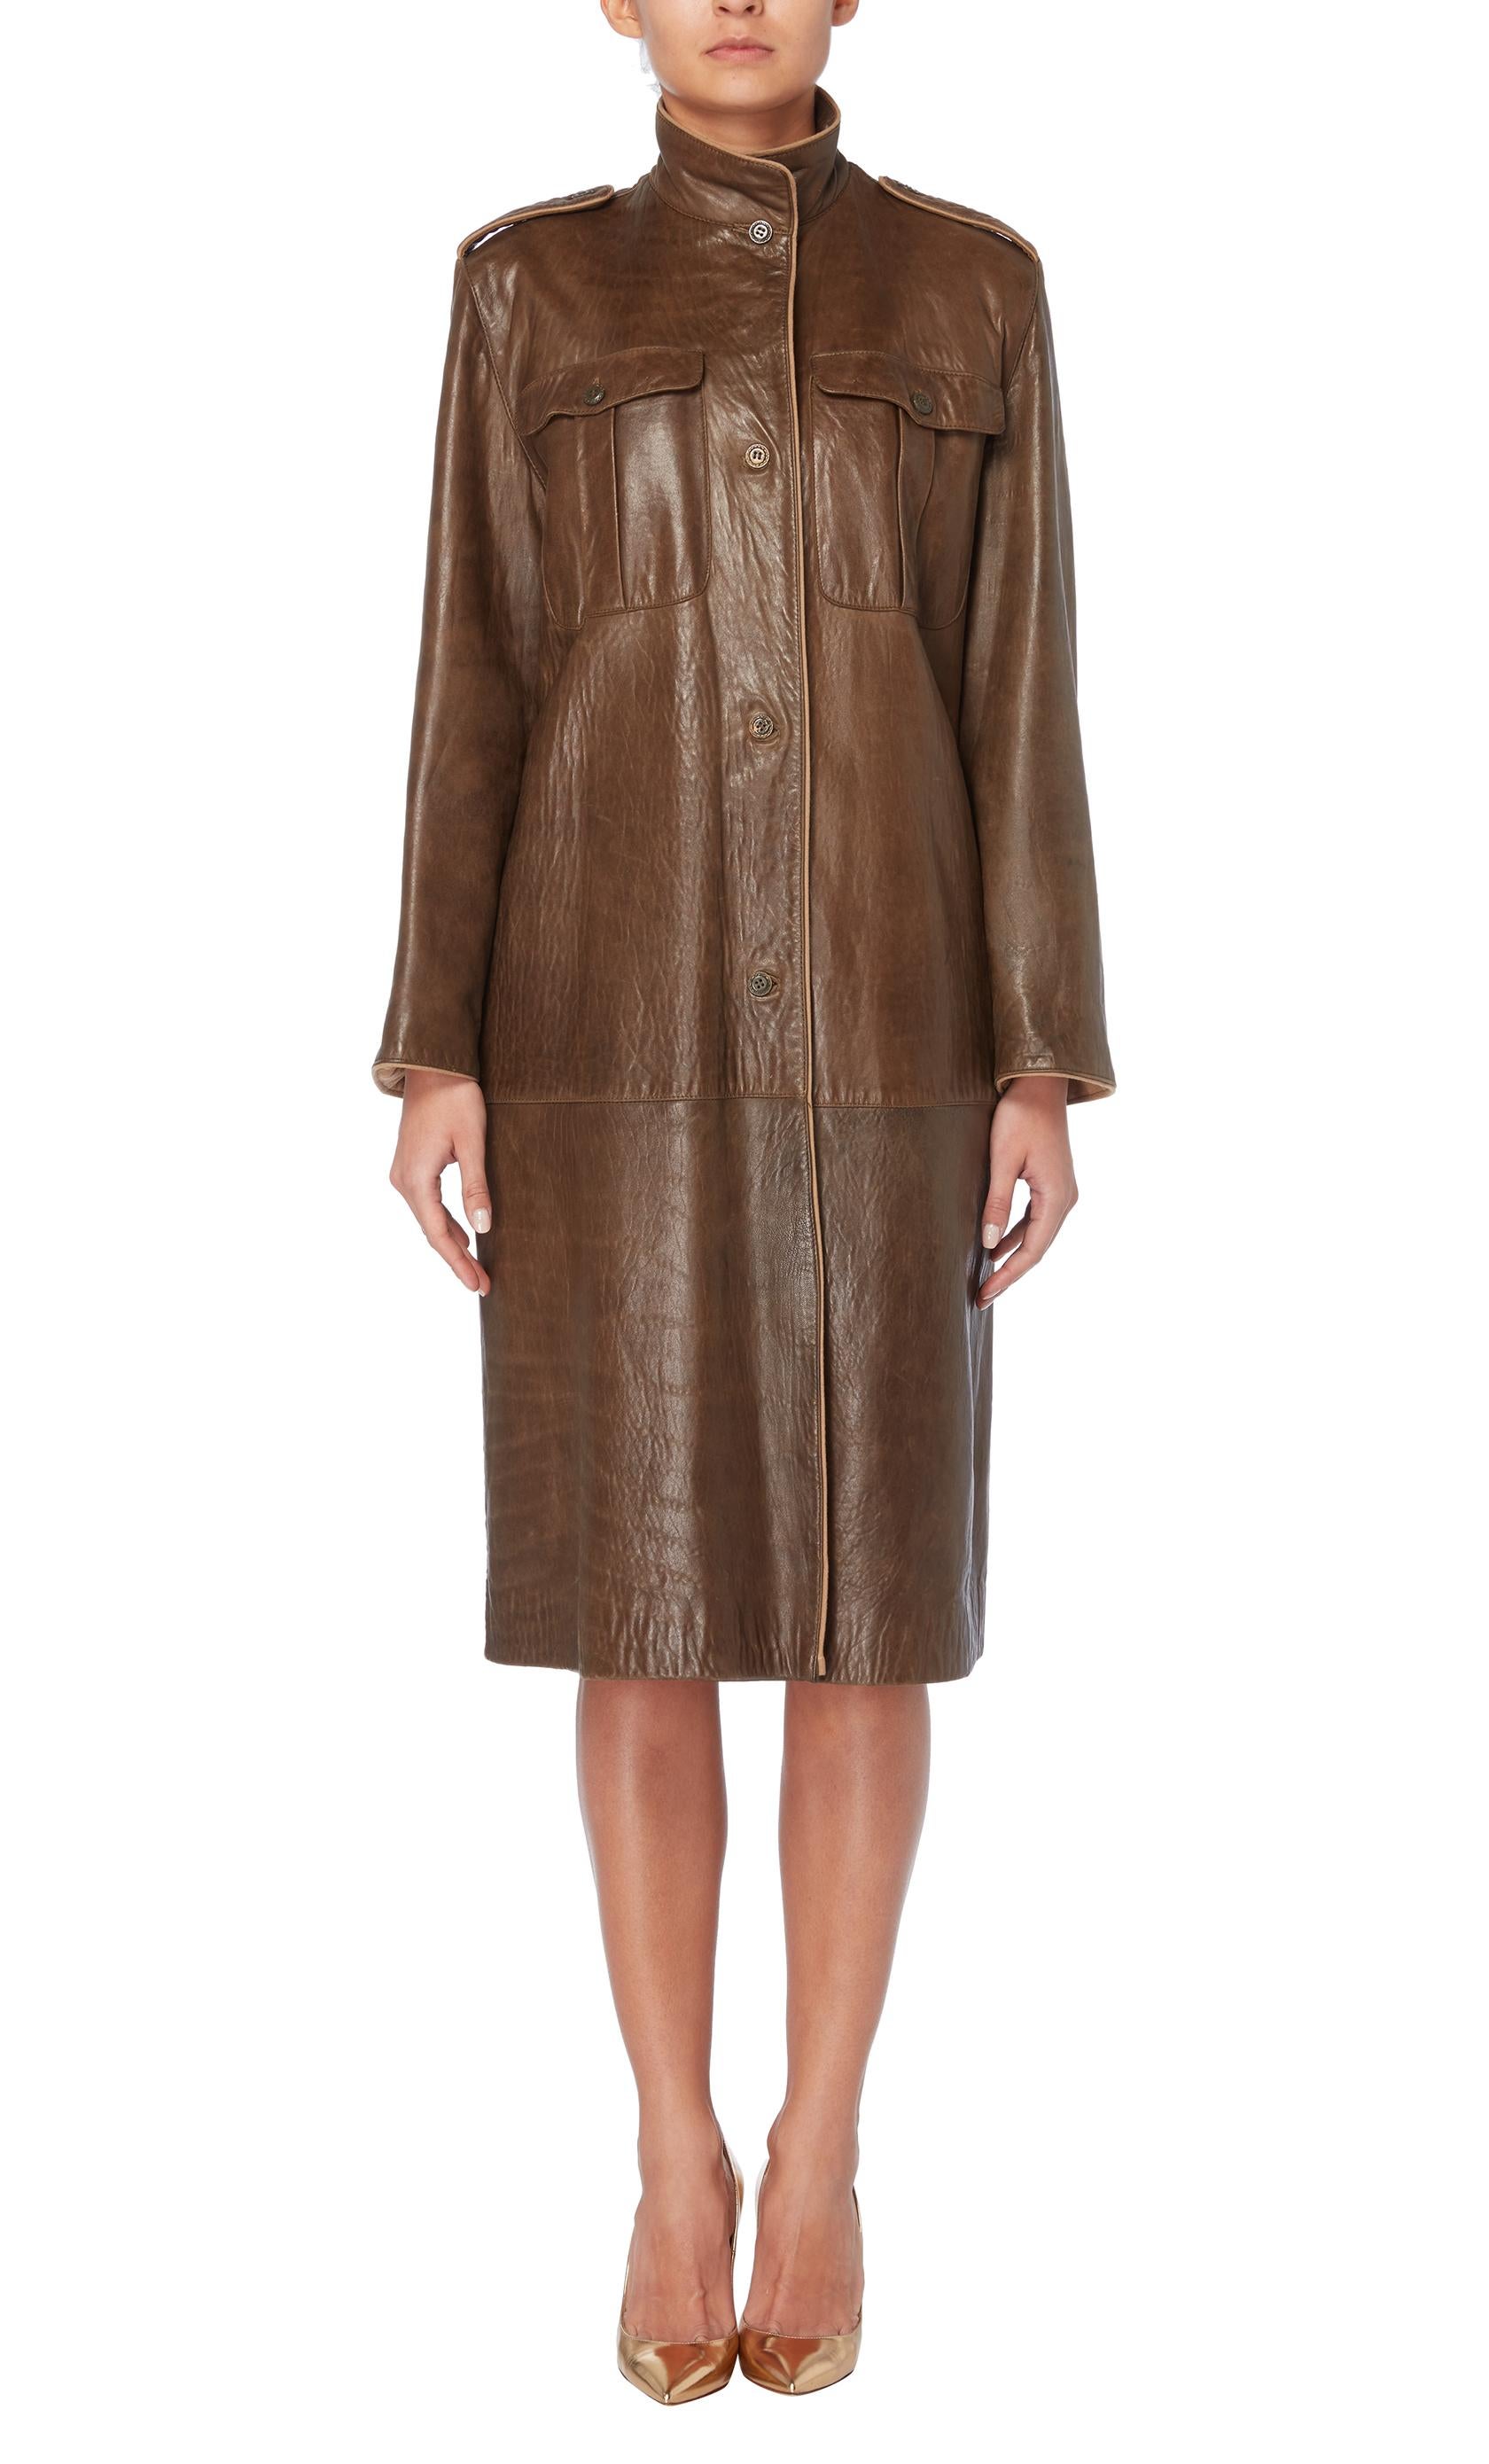 An early example of Gianni Versace's work, this brown leather coat if from the Autumn/Winter 1982 collection. Featuring a funnel neck, epaulettes and chest pockets, the coat has a military style and fastens with buttons to the front.